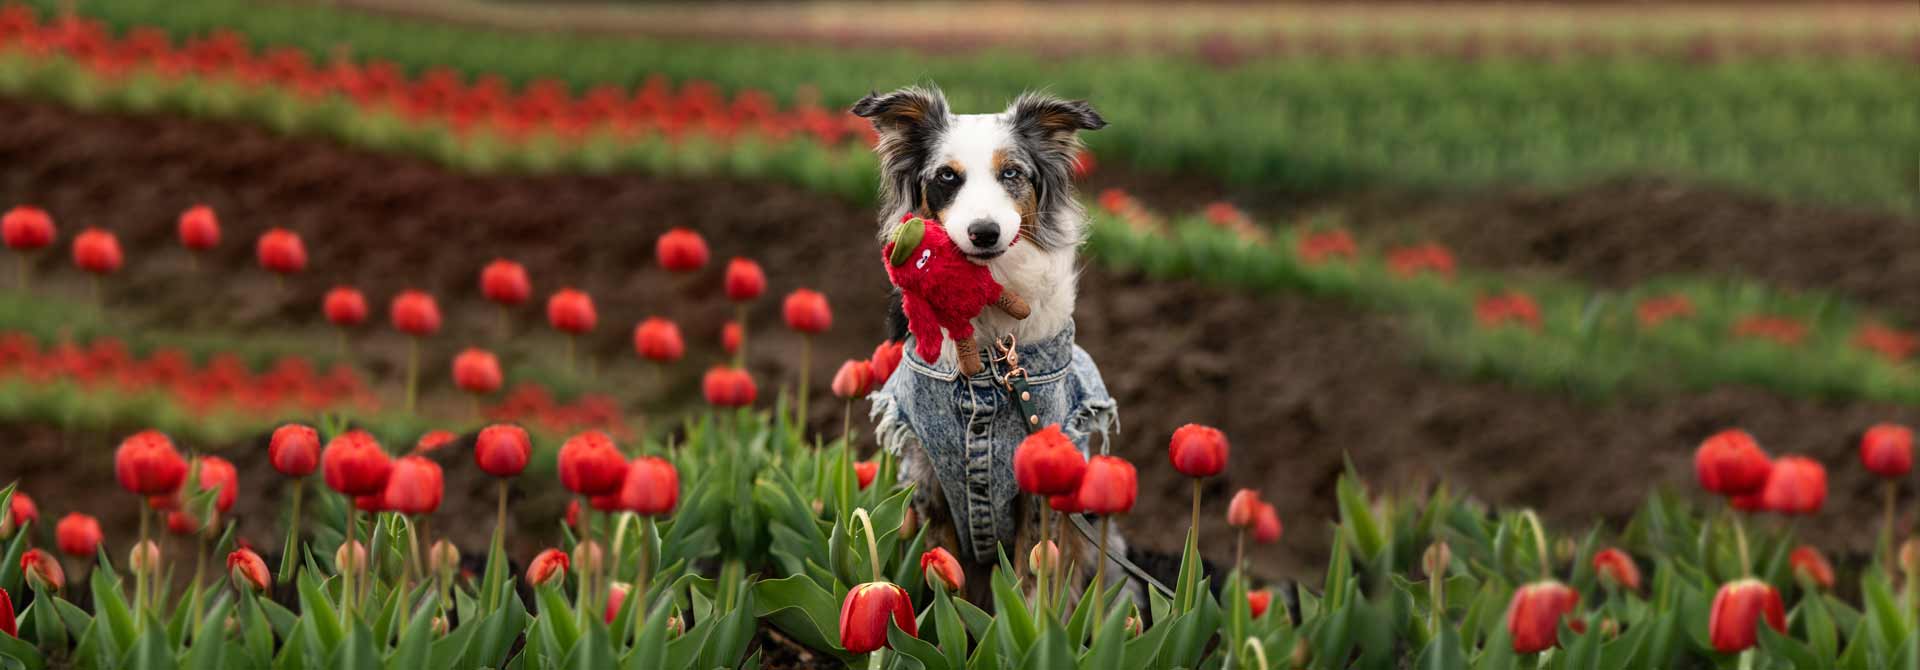 An Australian shepherd dog is holding a plush toy in its mouth in field of red tulips